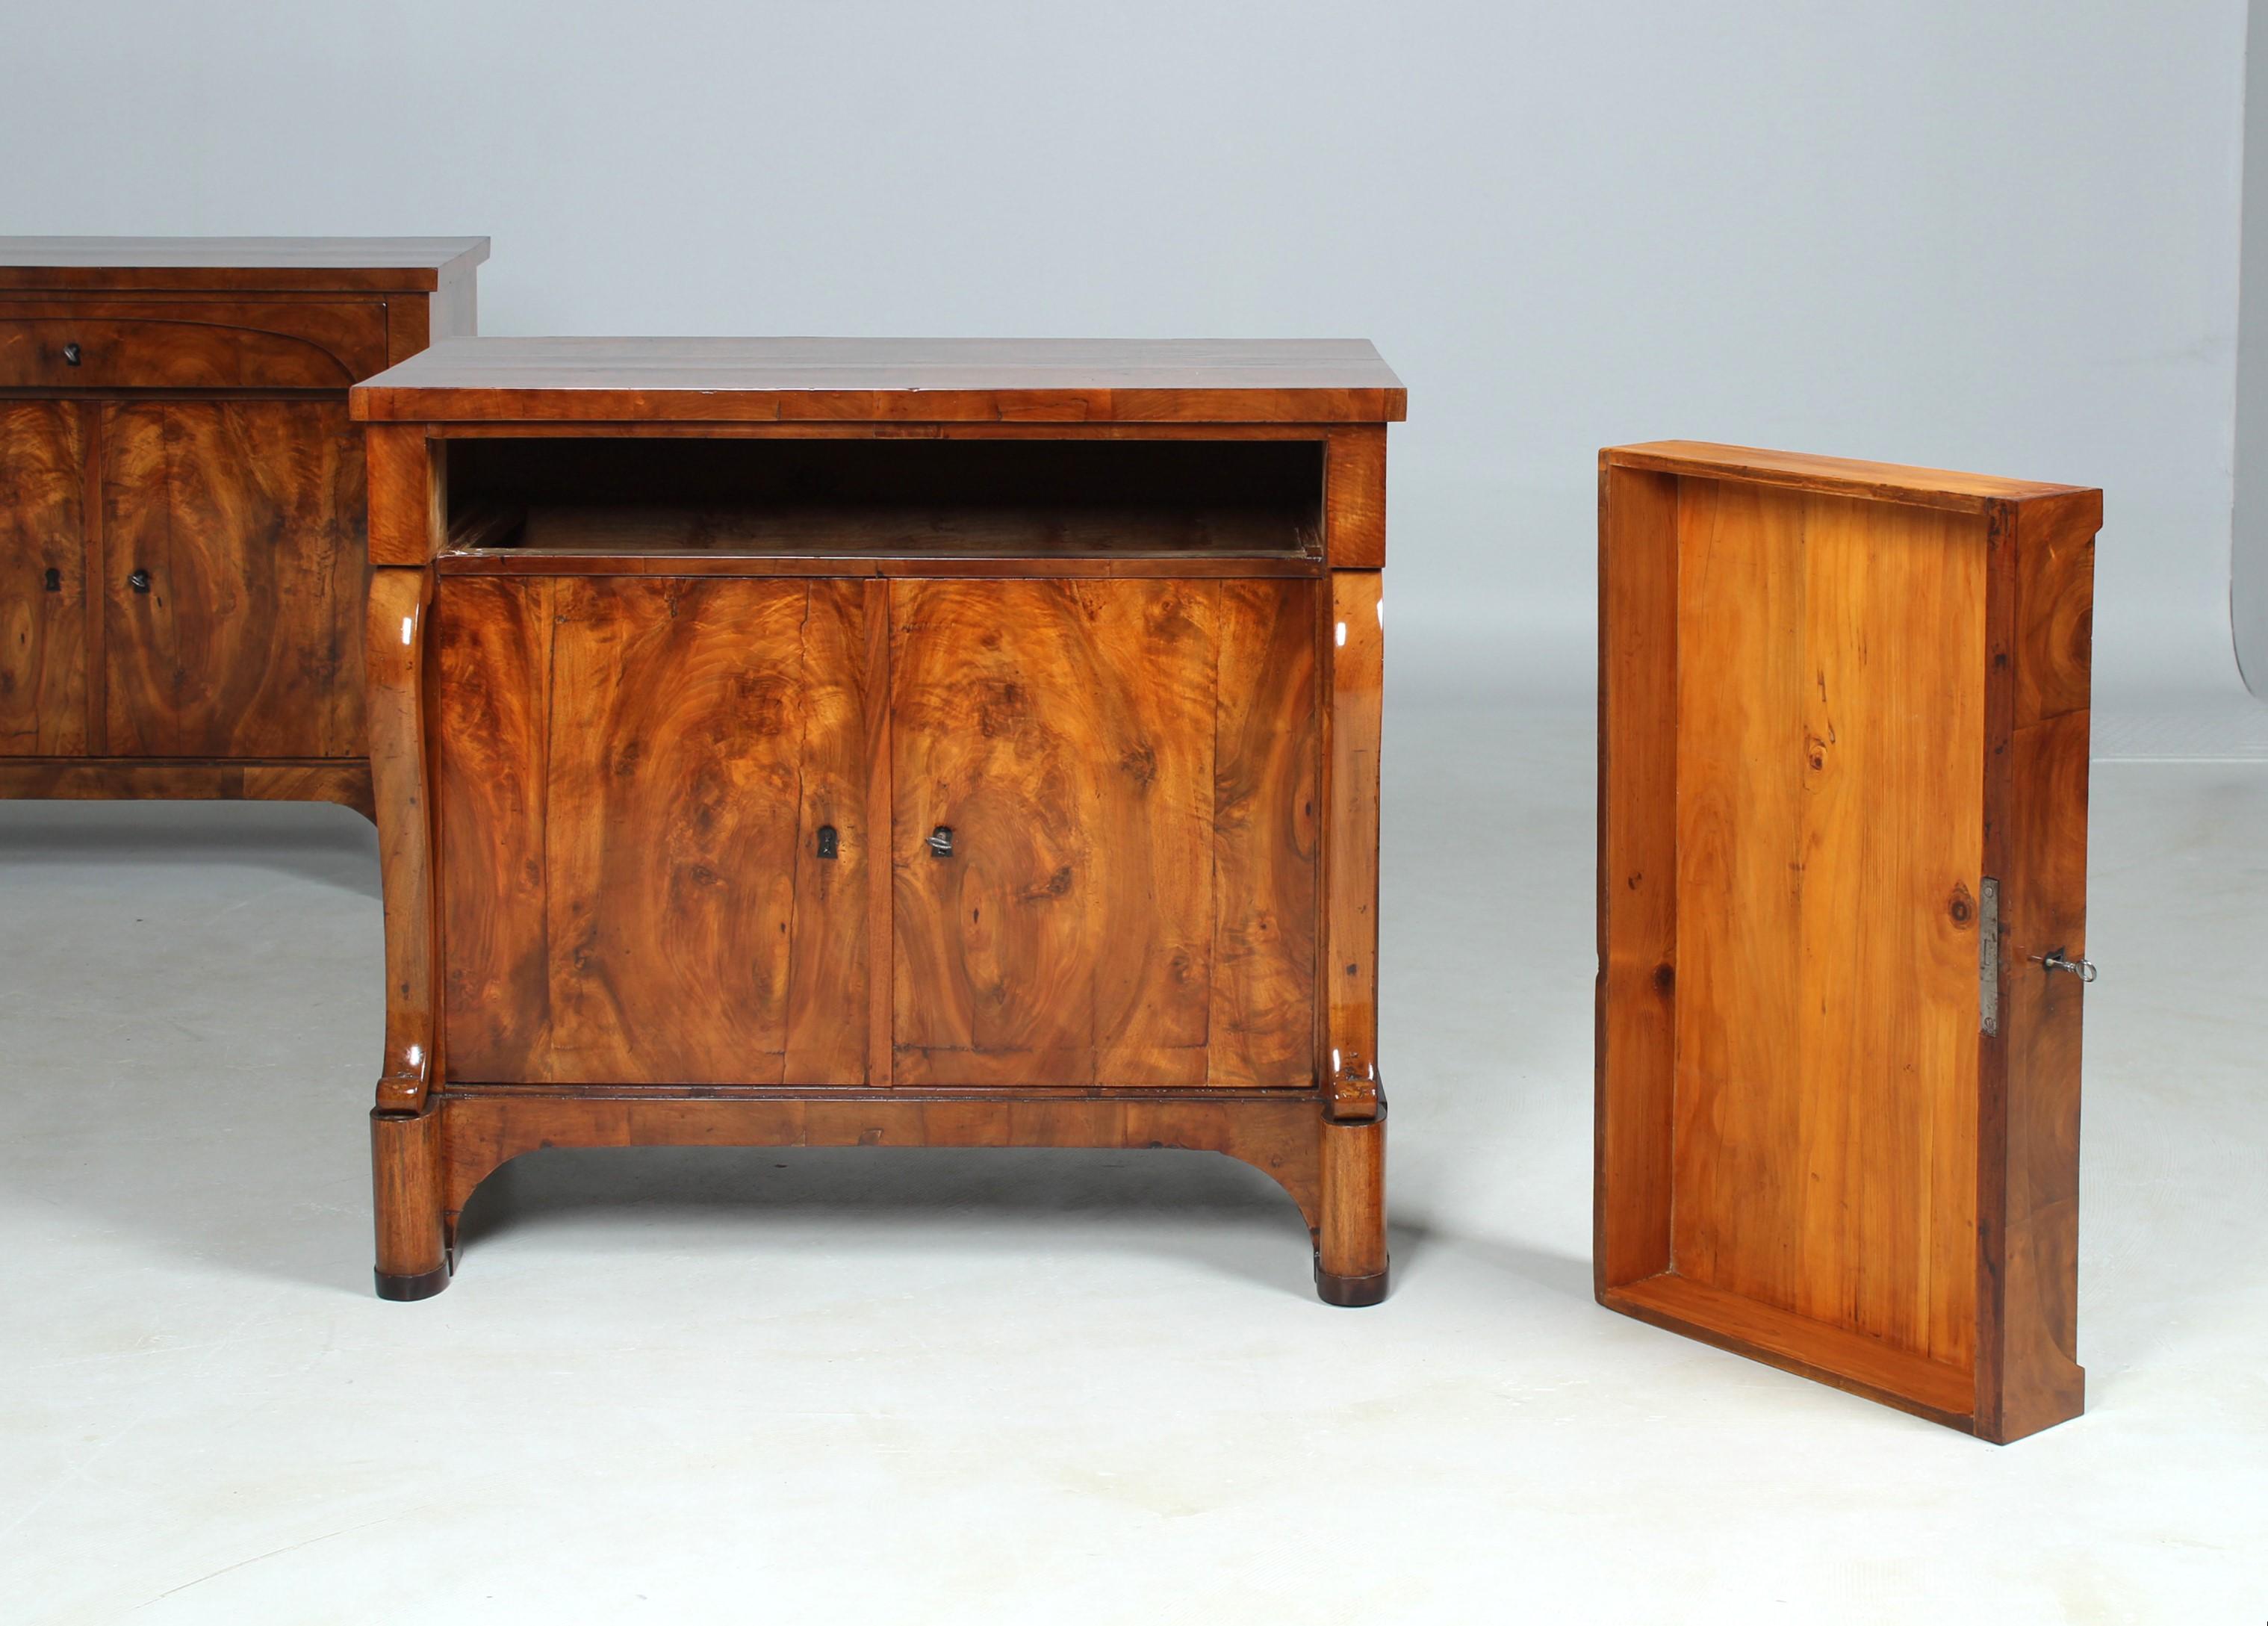 Pair of Early 19th Century Biedermeier Chests or Sideboards, Walnut, c. 1825 6